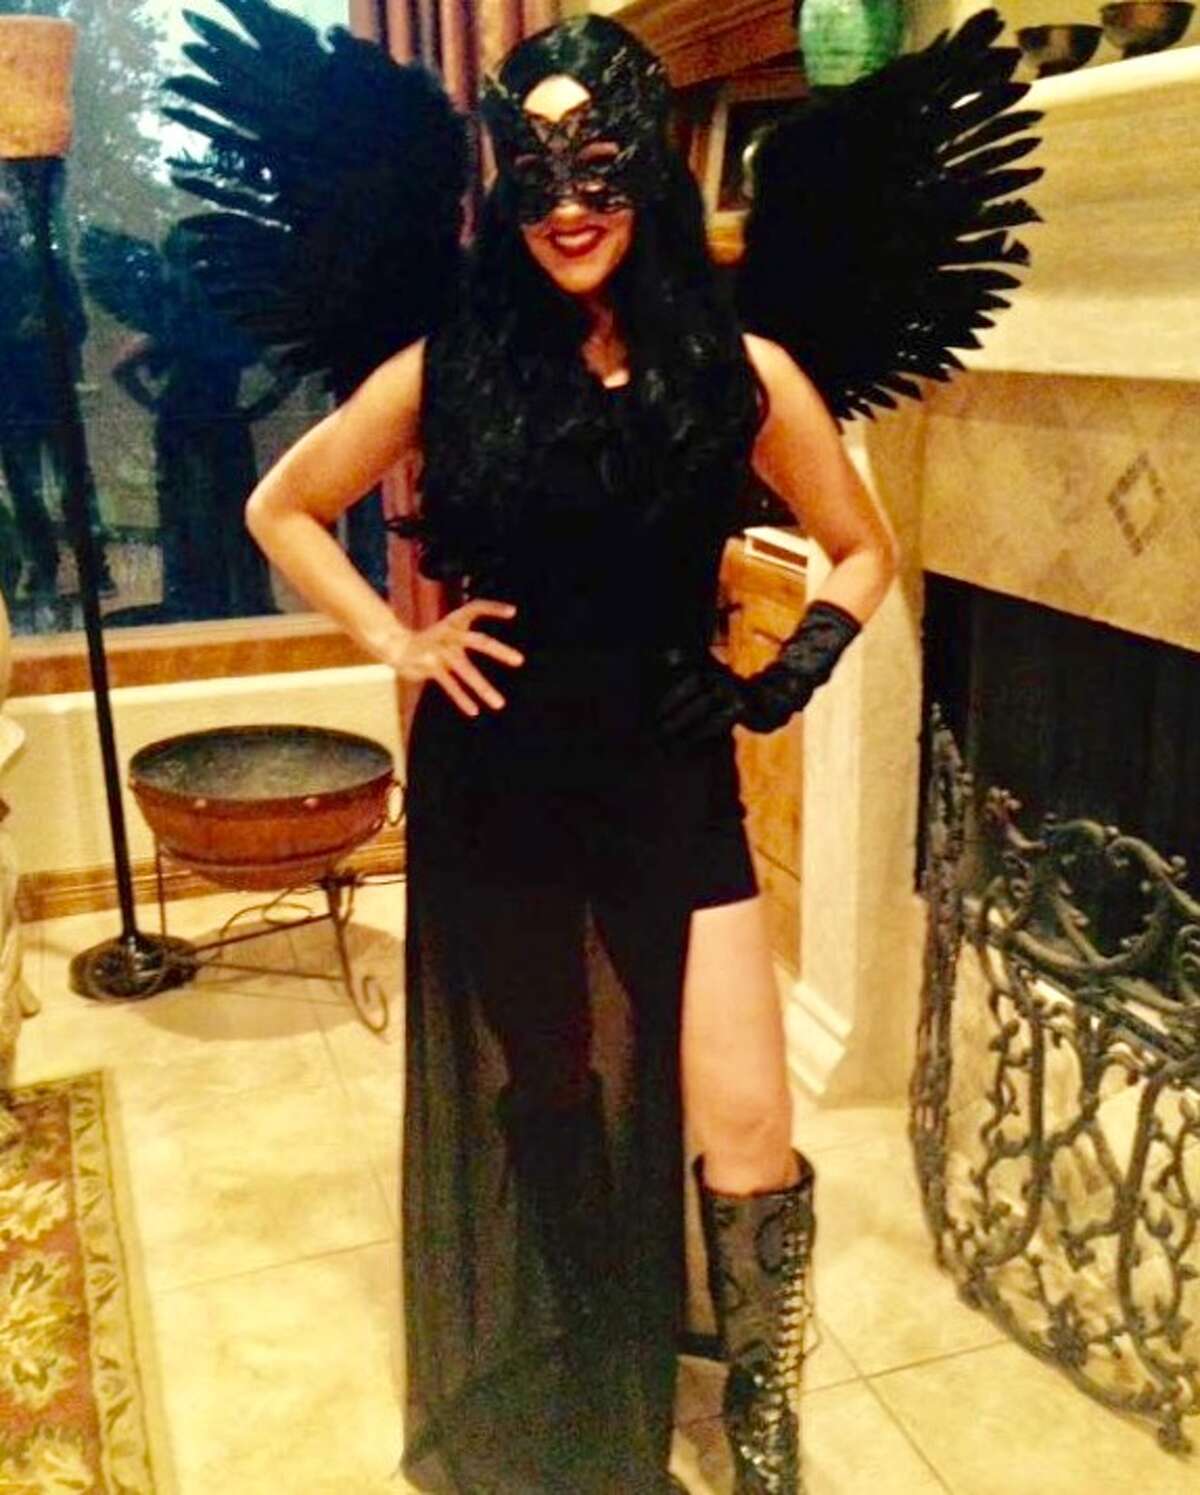 Watch out! WOAI anchor and Trouble Shooters reporter Delaine Mathieu went wicked as 'Dark Delaine' for Halloween in a costume she put  together one year.